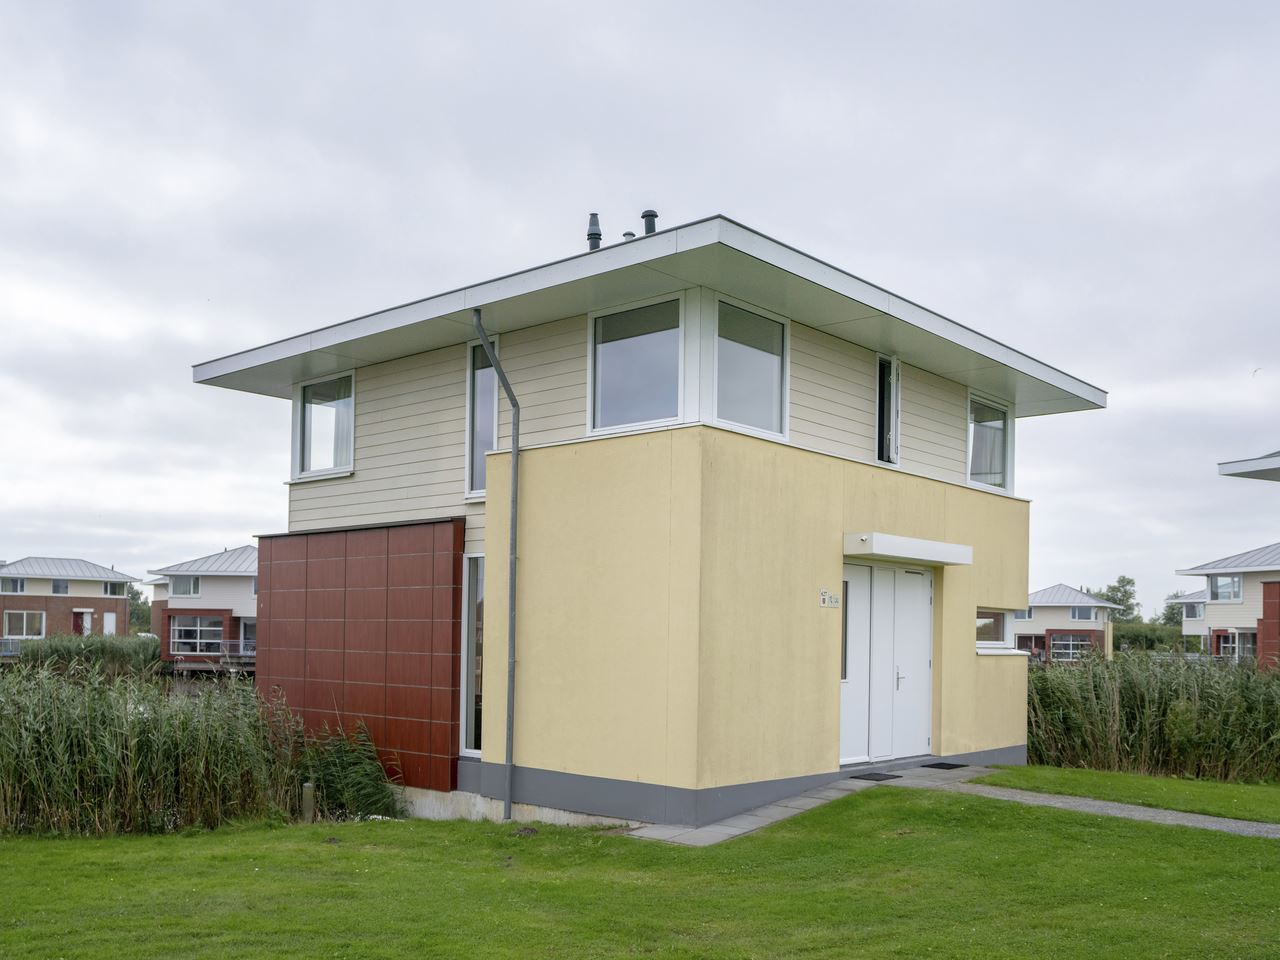 6-persoons woning